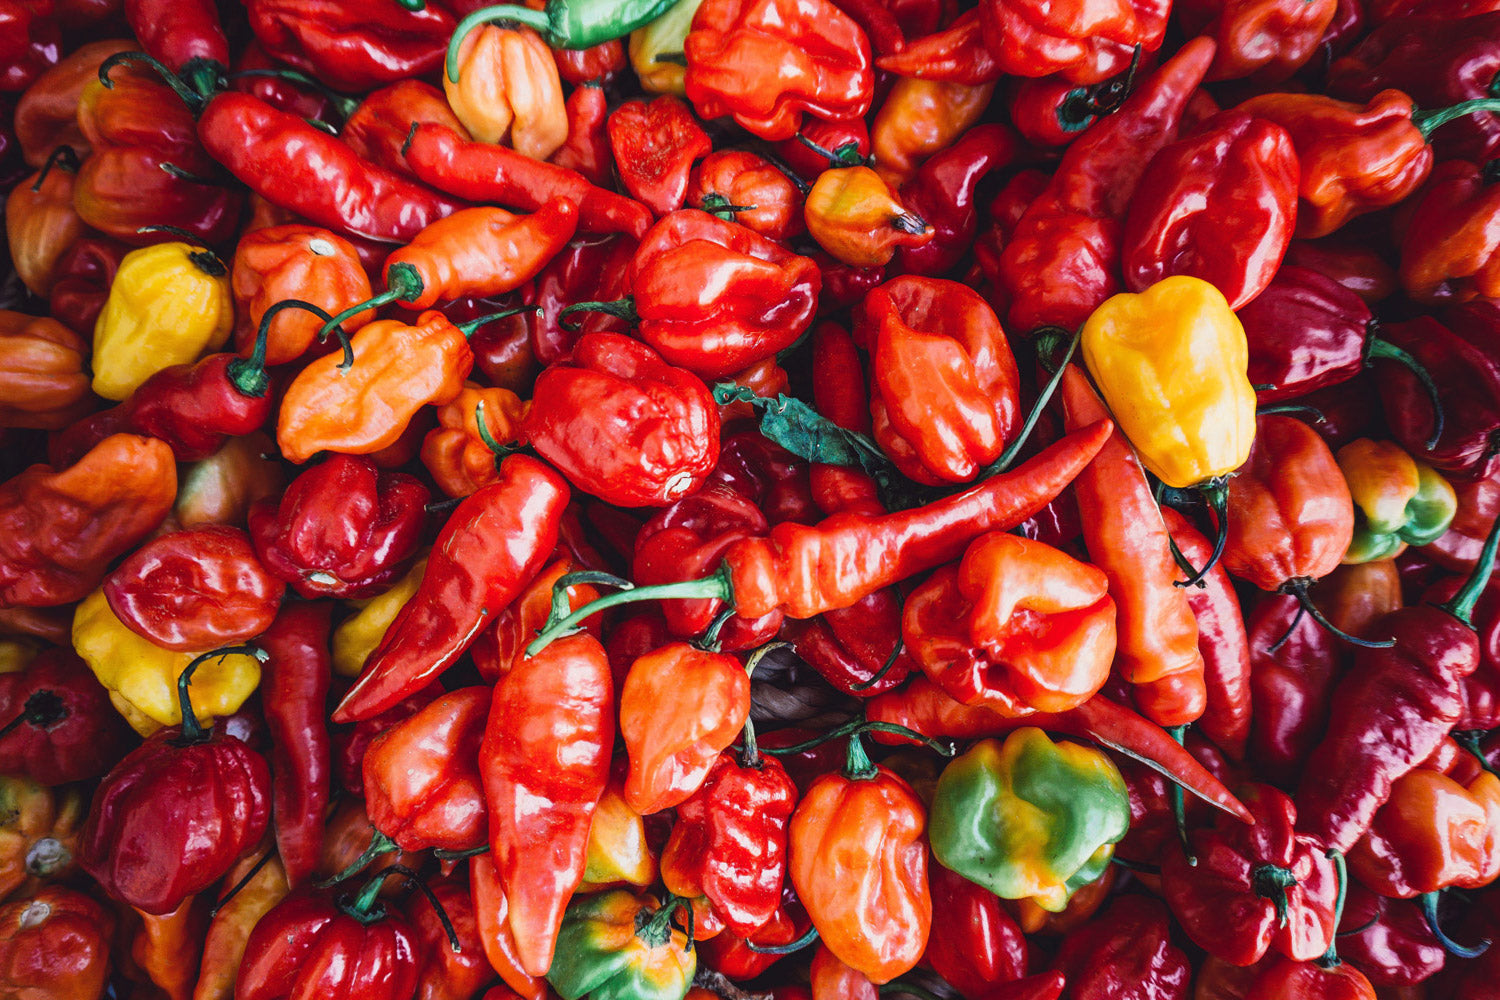 The Scoville Scale - A Guide to Hot Peppers